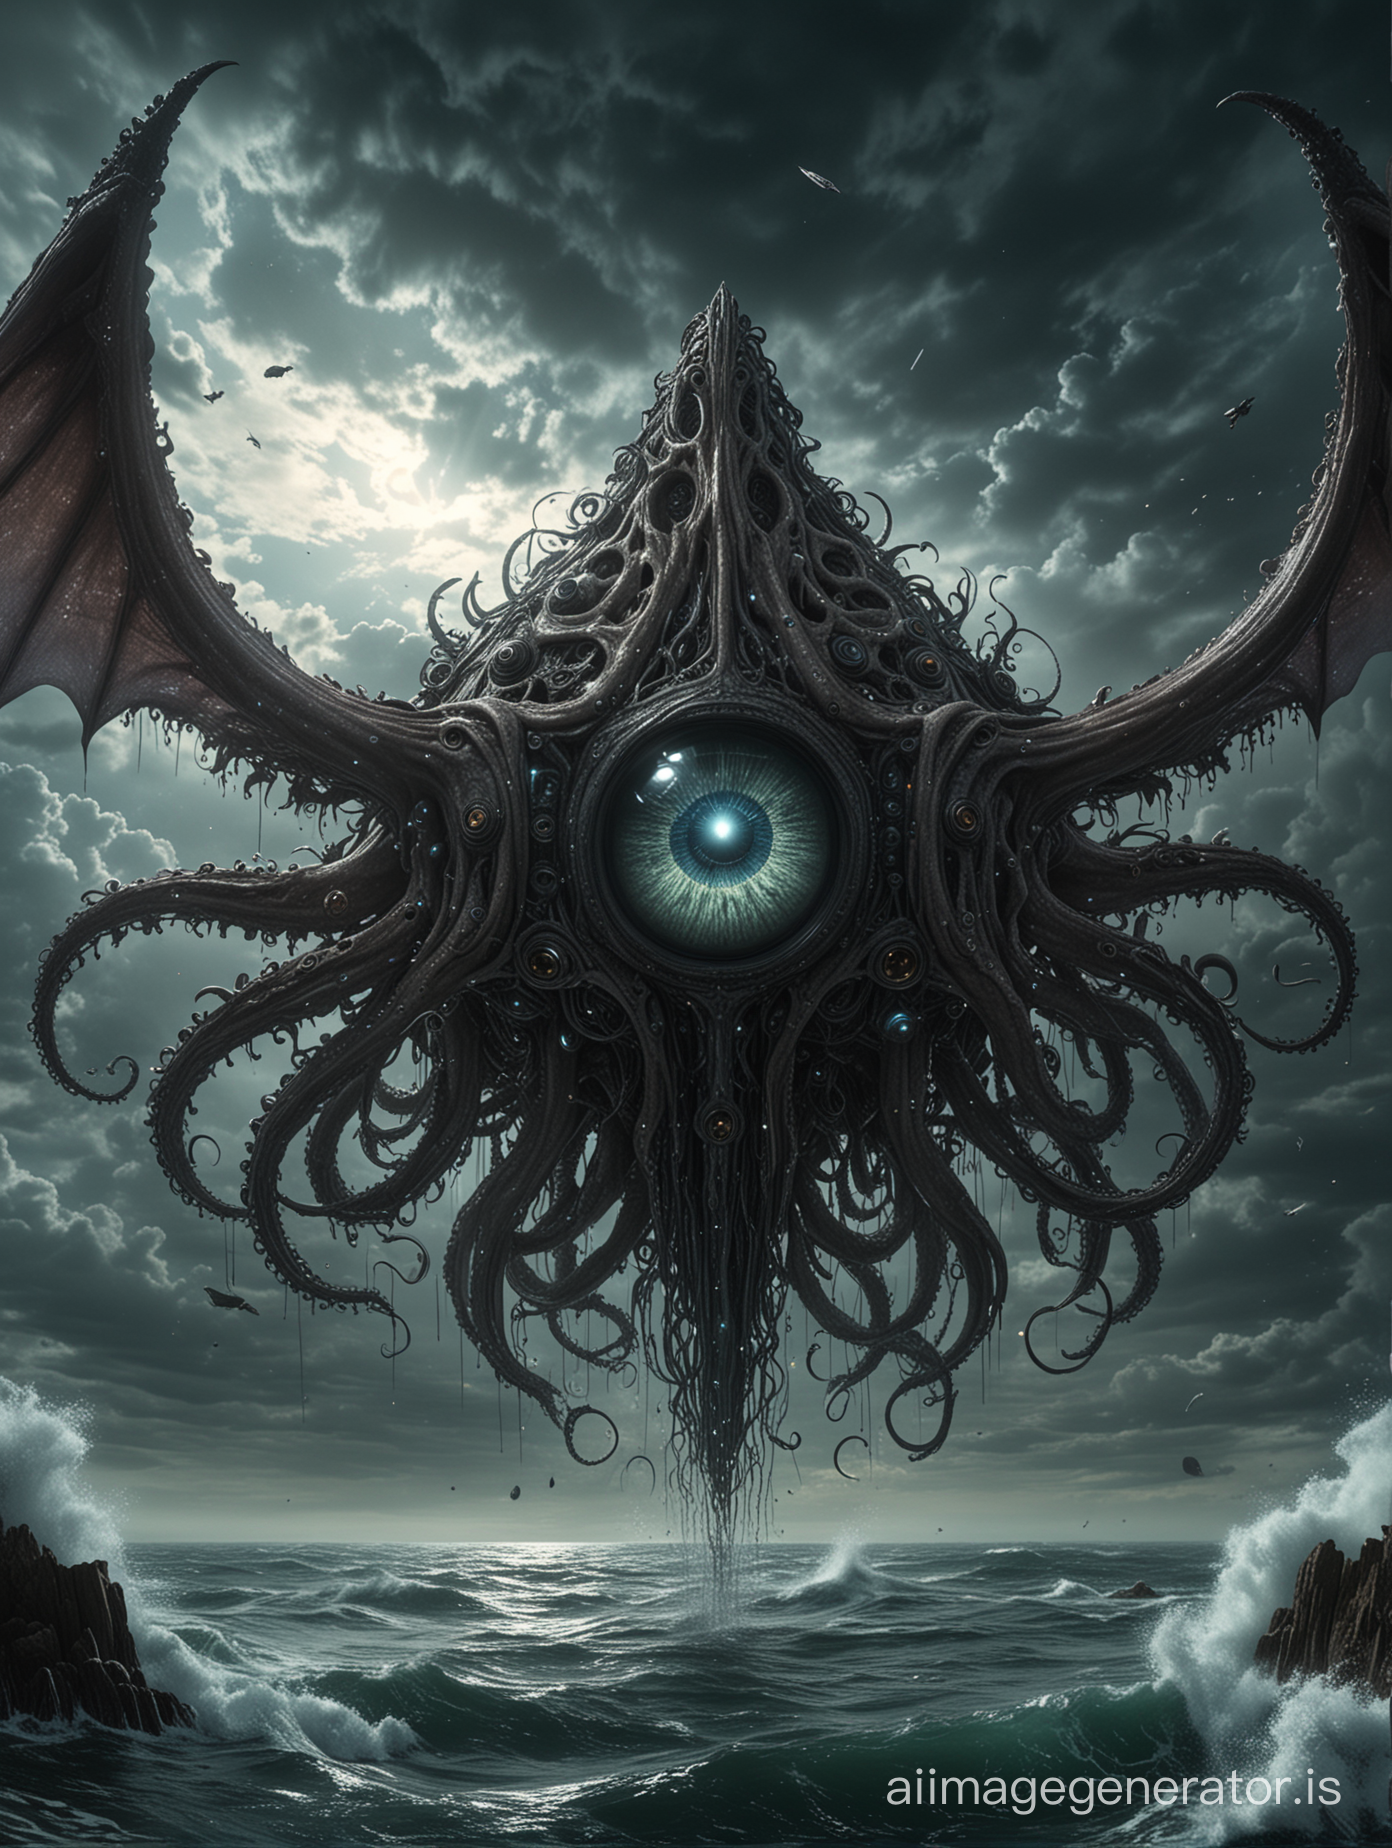 Craft a high-resolution 8k, photorealistic image that merges the omnipresent eye wings structure, symbolizing universal surveillance, with the eldritch horror style of H.P. Lovecraft. This non-anthropomorphic entity exhibits wings made of countless eyes, unfolding amidst swirling cosmic clouds, contrasted against the floating central sphere of an eye monster, emitting an eerie, spectral light. The tentacles extend into the darkness, adorned with arcane symbols, suggesting a universe of inscrutable, haunting watchfulness. Rendered in 22 Megapixels with HDR, the composition embodies a detailed, shimmering perspective of a dark, mysterious cosmic action scene, shot on IMAX 70mm for utmost clarity and perfection.photorealistic, Depth of Field | Action Scene | Natural Lighting | Subject | Centered-shot | 22 Megapixels | Shot on IMAX 70mm | Detailed |Elegant | Perfection | Shimmering | Prespective, HDR, 8k, high resolution, gear-like mechanism floating in a stormy sky, spikes adorning

